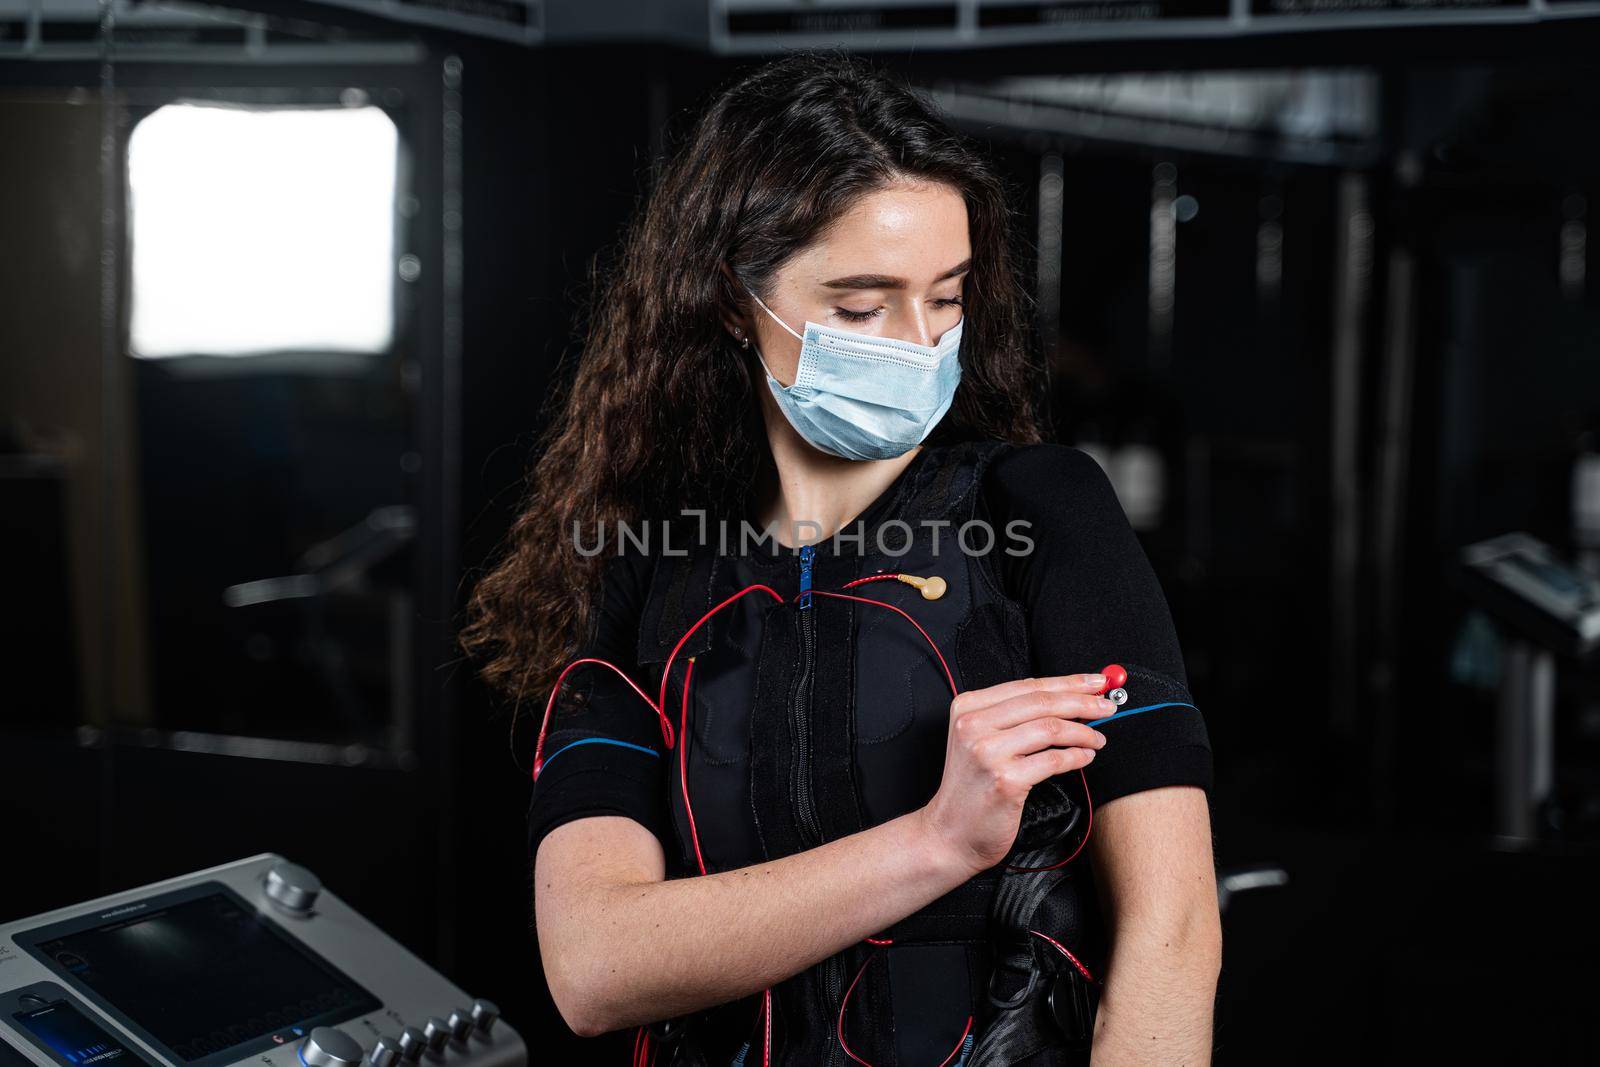 Girl in EMS suit and medical mask in gym. Protection from coronavirus covid-19. Sport training in electrical muscle stimulation suit at quarantine period